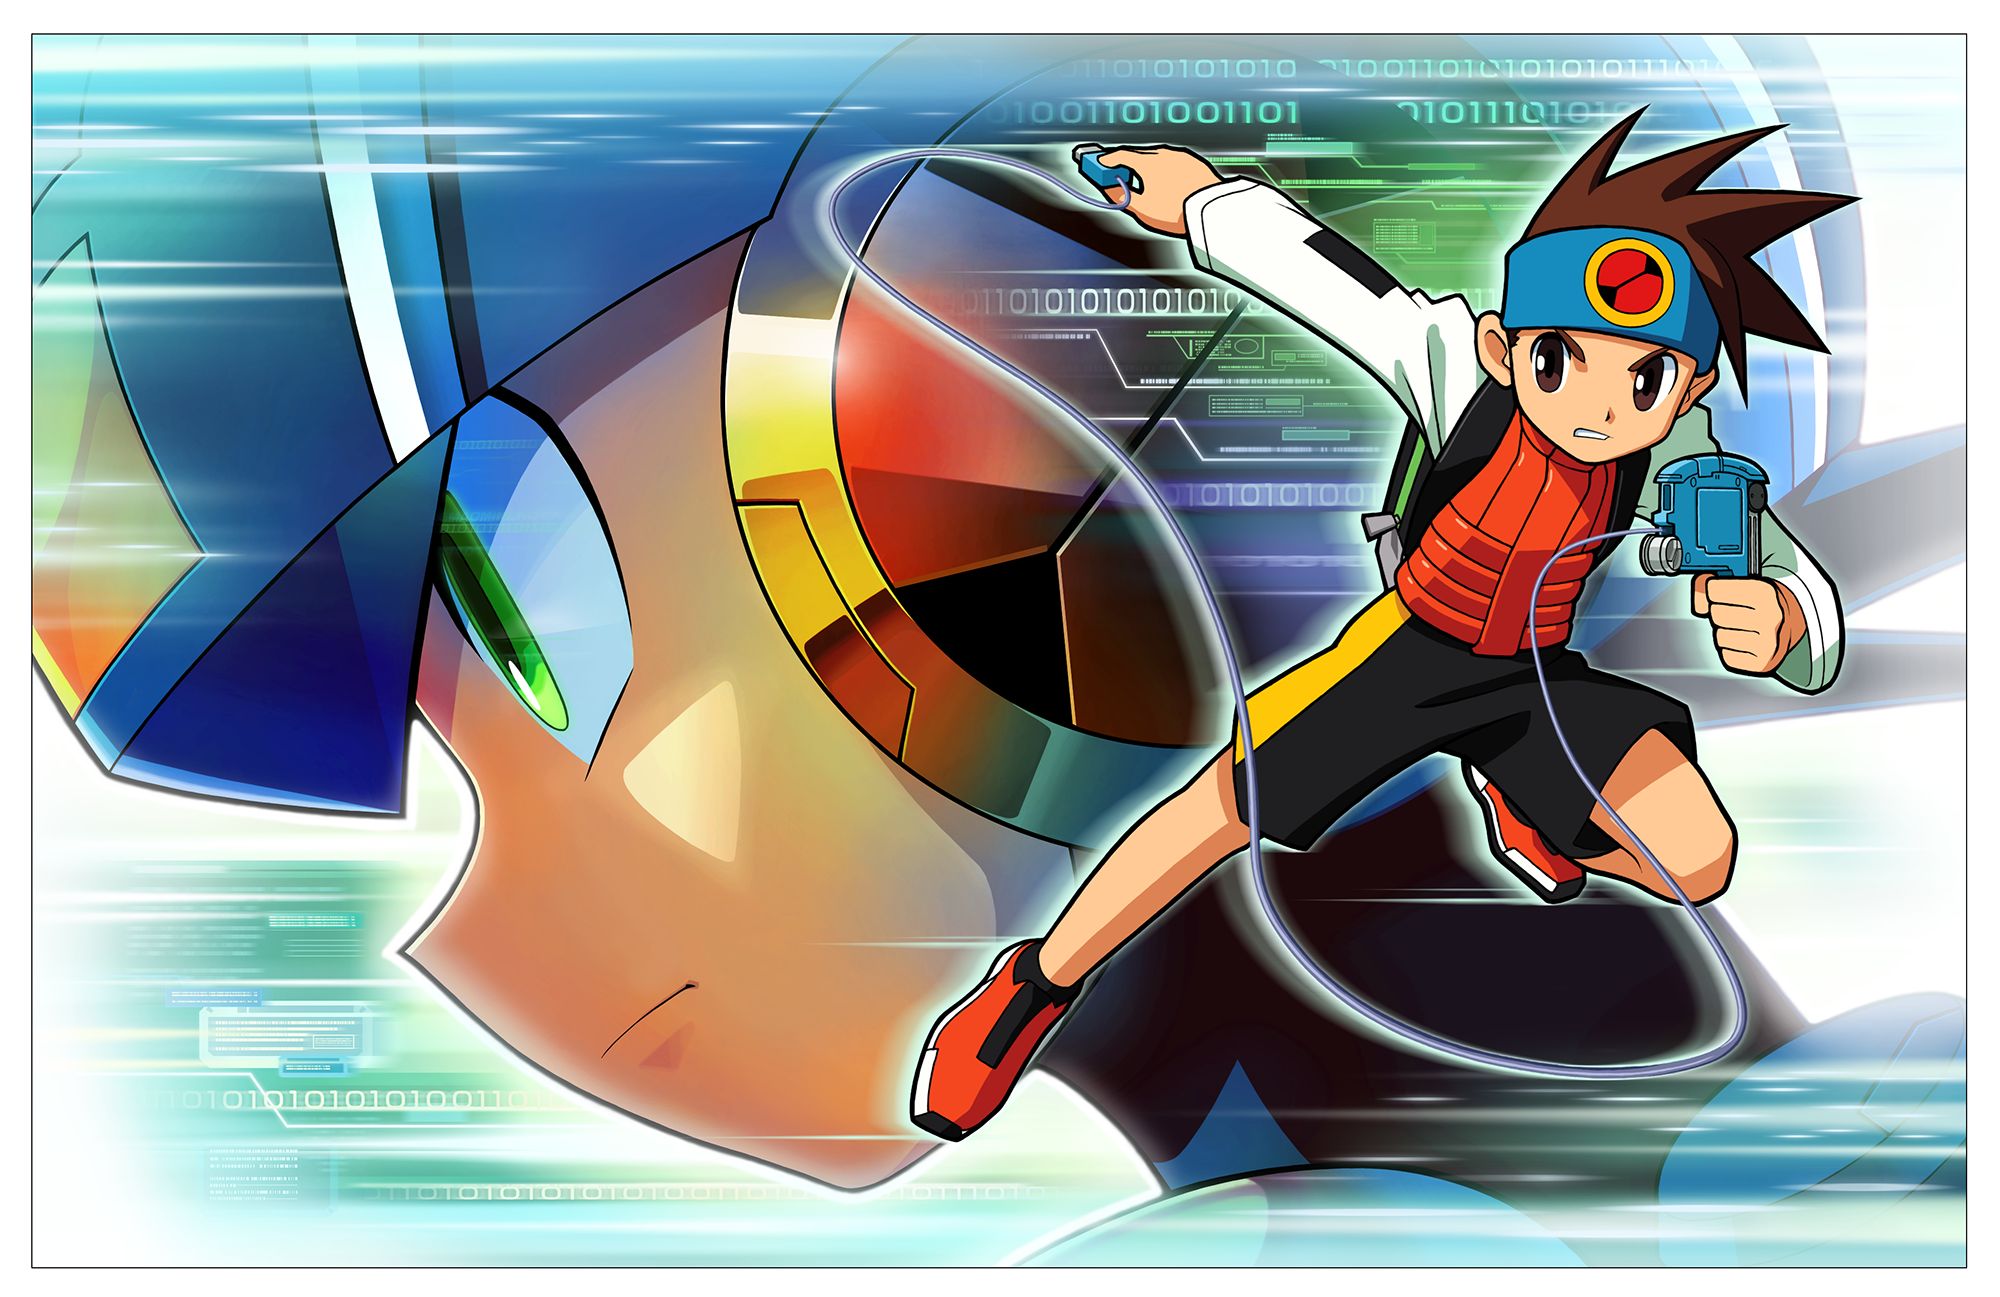 http://images3.wikia.nocookie.net/__cb20100626144144/megaman/images/b/b7/Normal_bn3white_promo.jpg